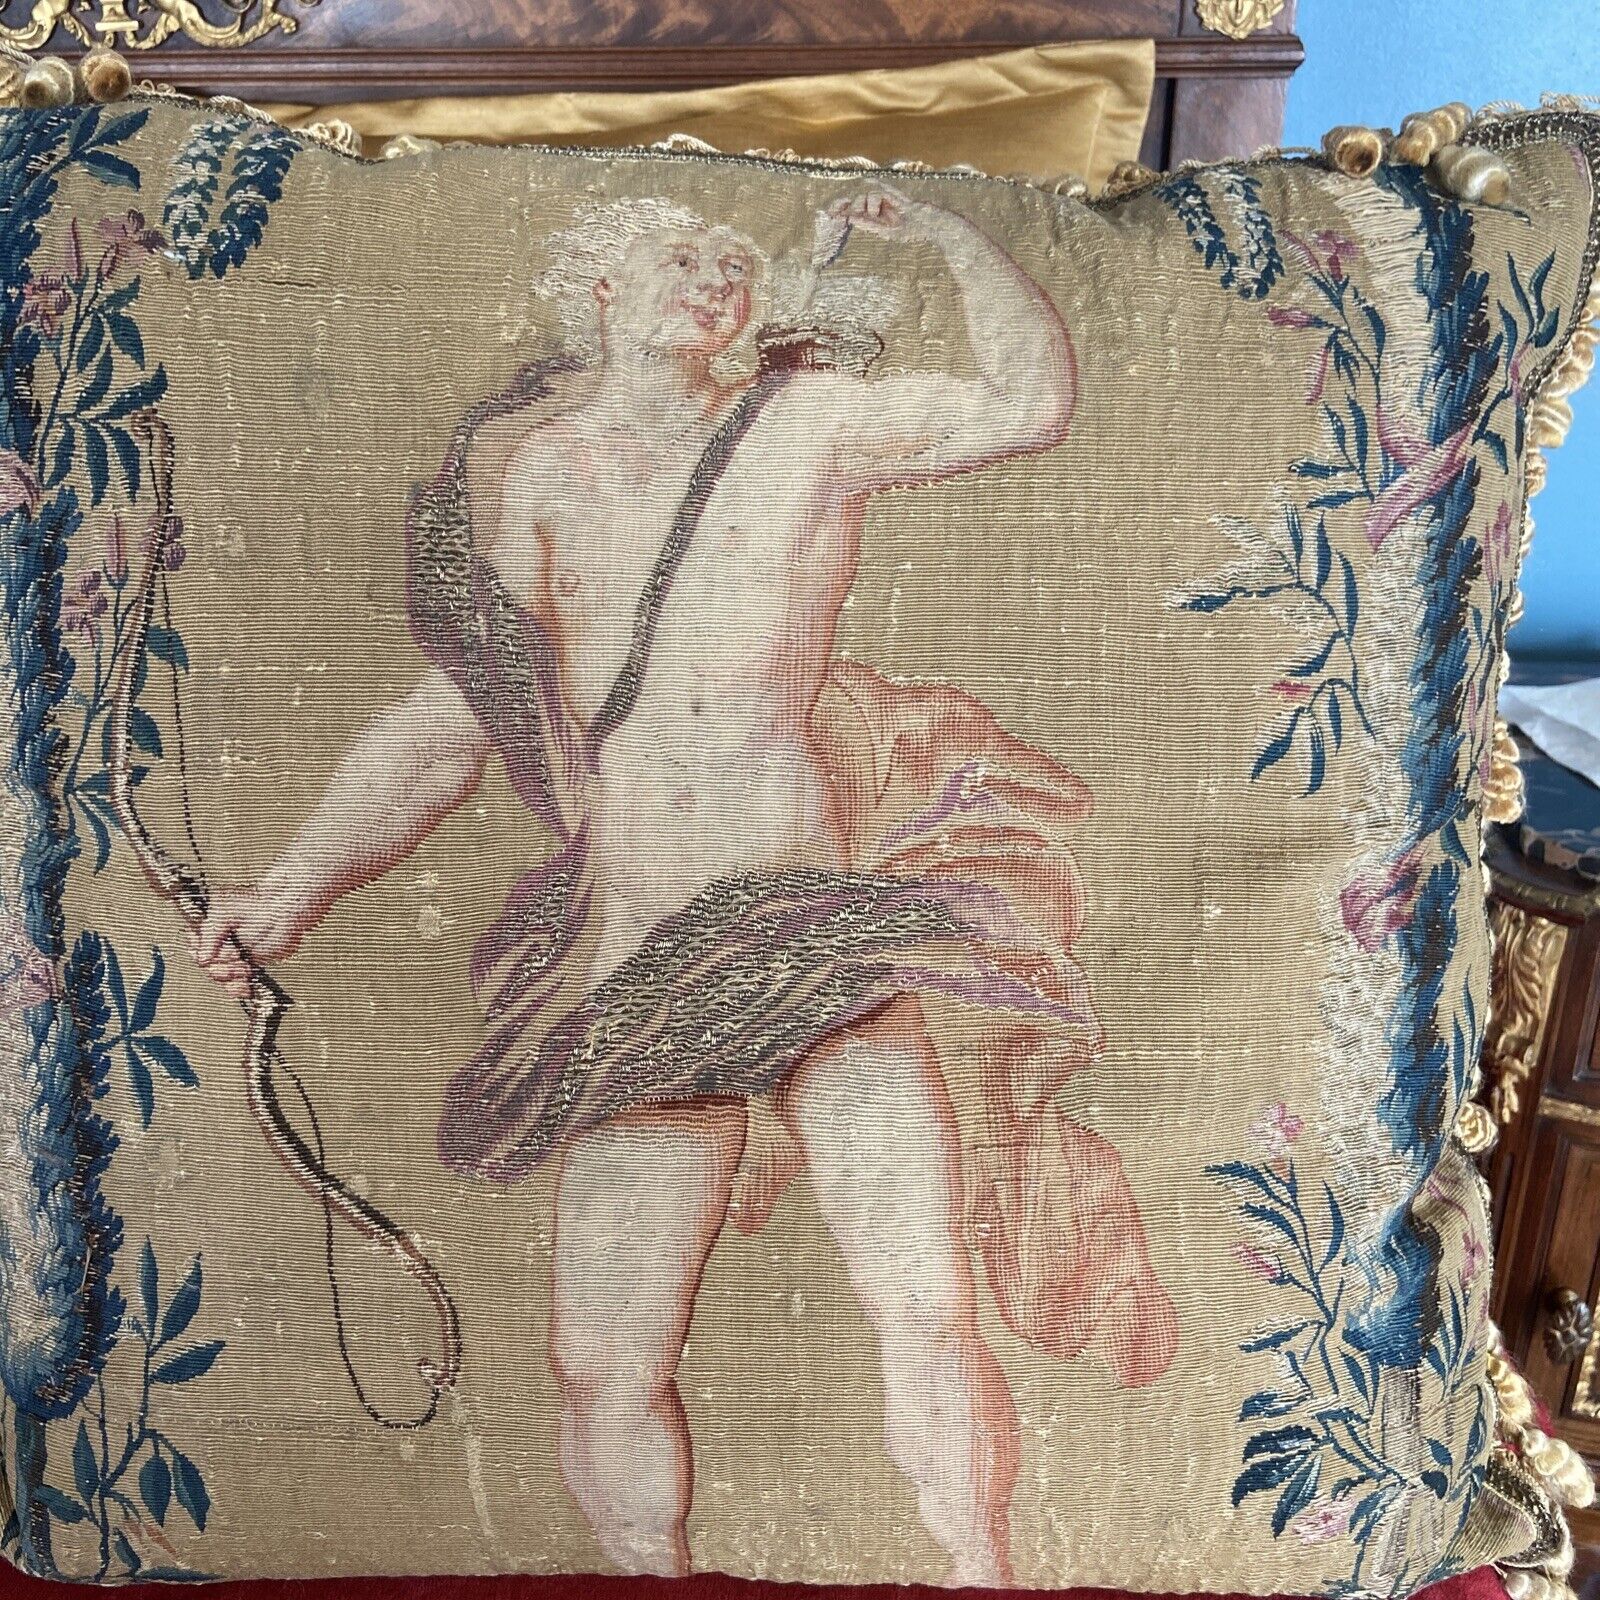 Antique French Aubusson 18c Tapestries Pillow With Cherub Mythological Hermes